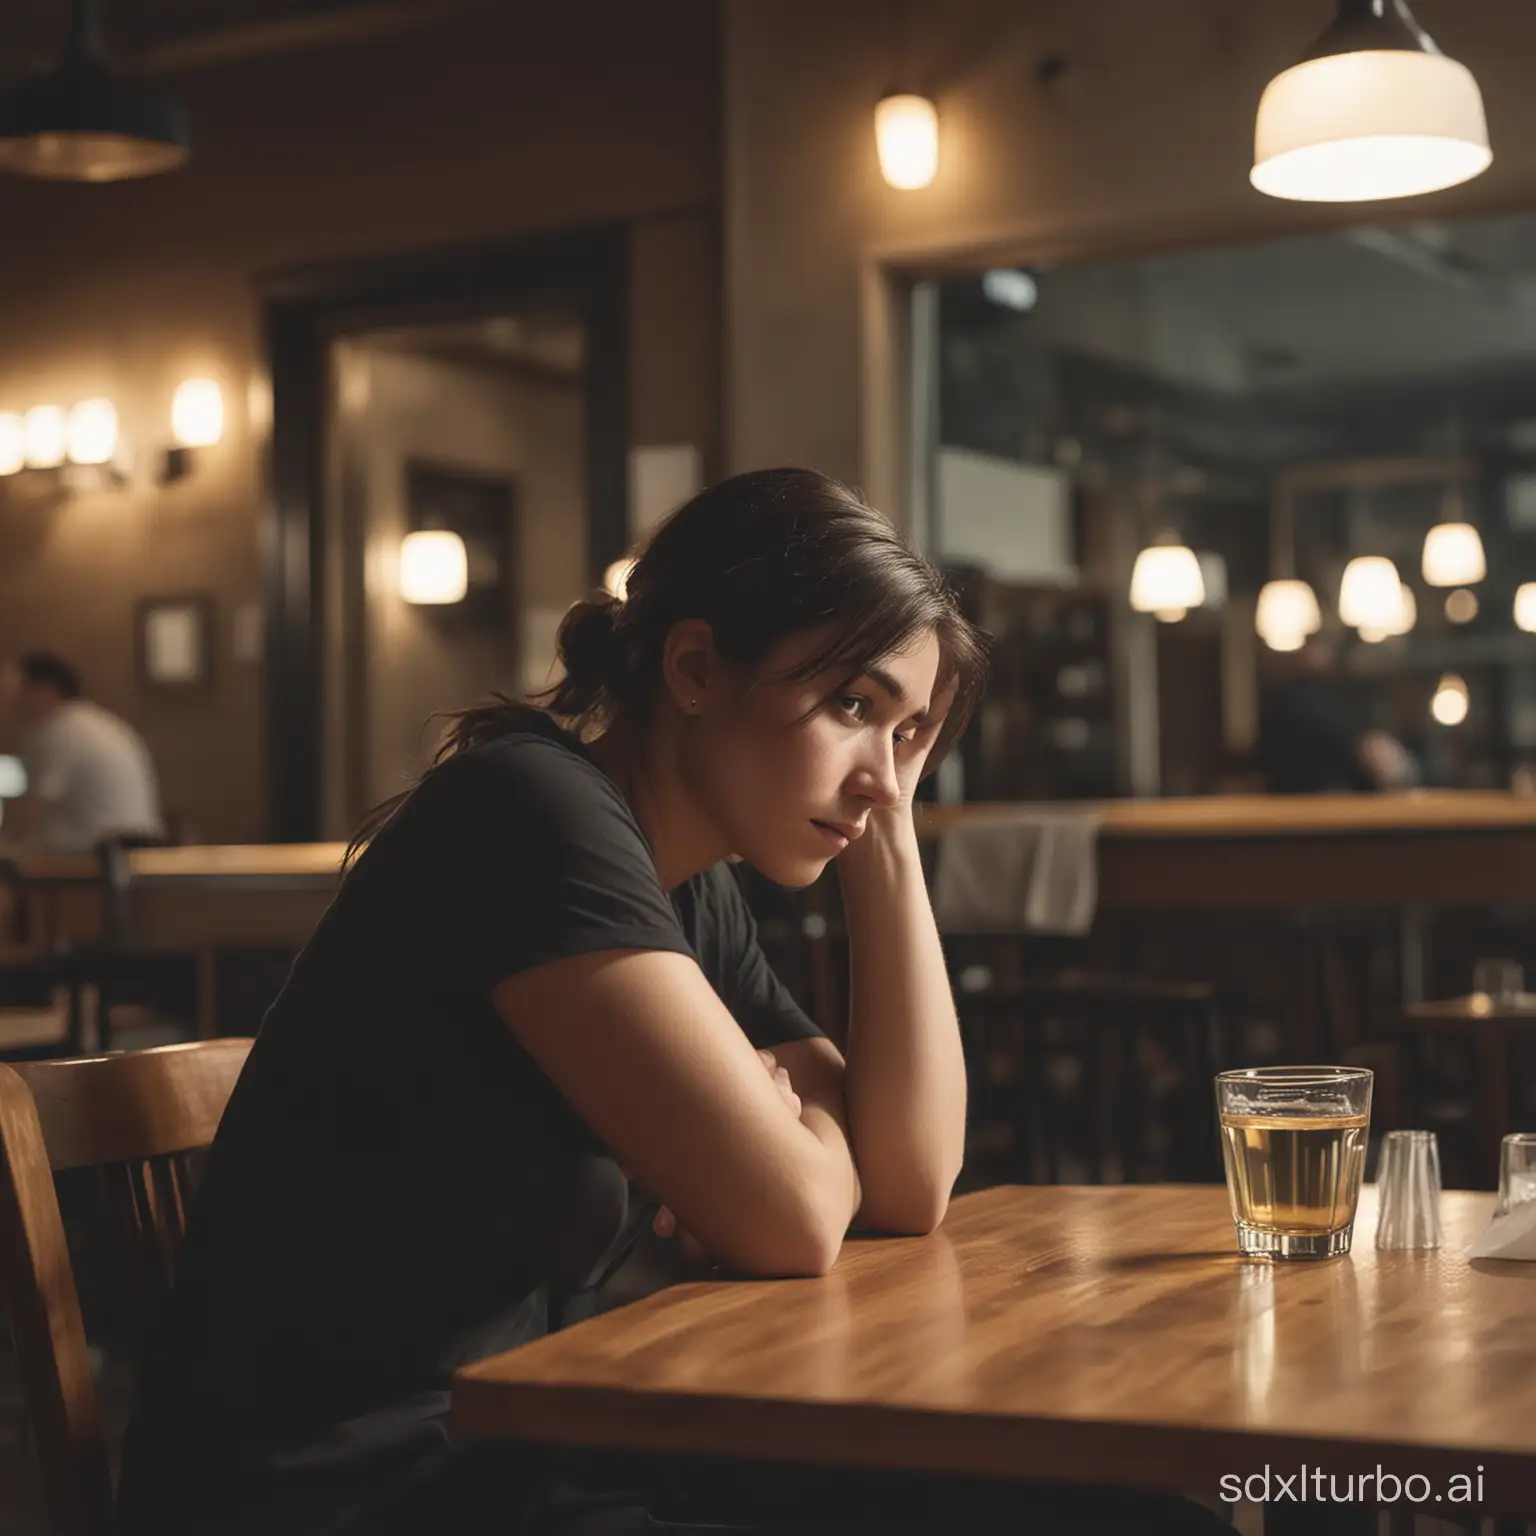 A person sitting at a restaurant, alone, sad, dramatic, close up